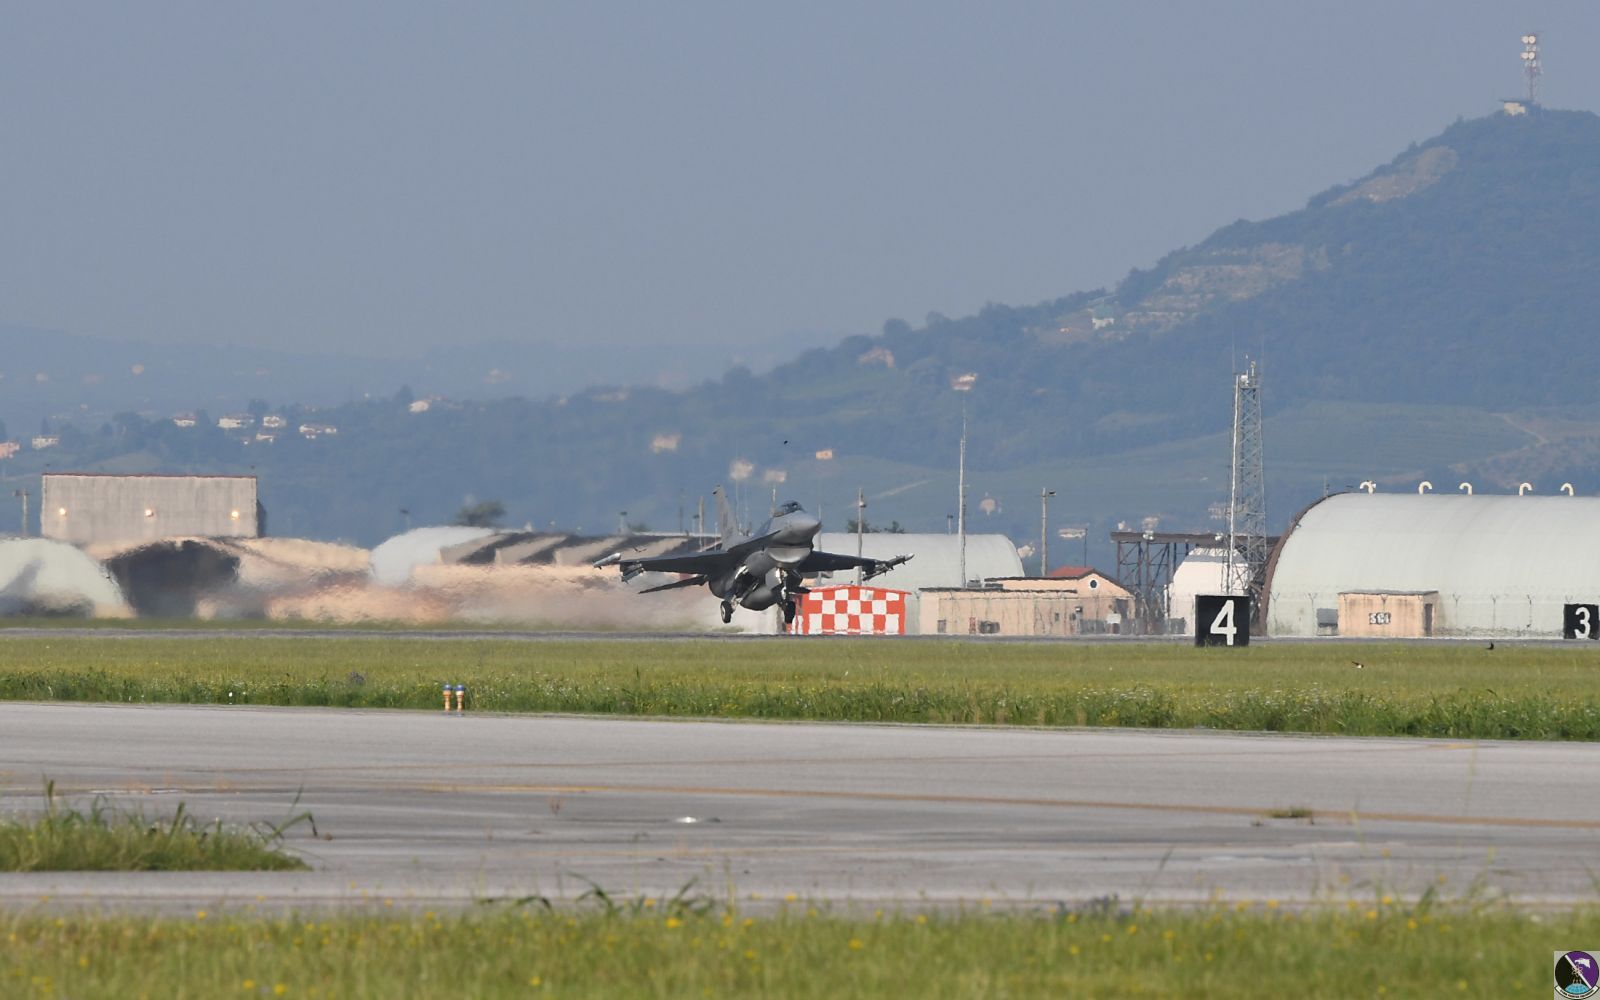 510th FS F-16s takeoff for Black Sea Ops